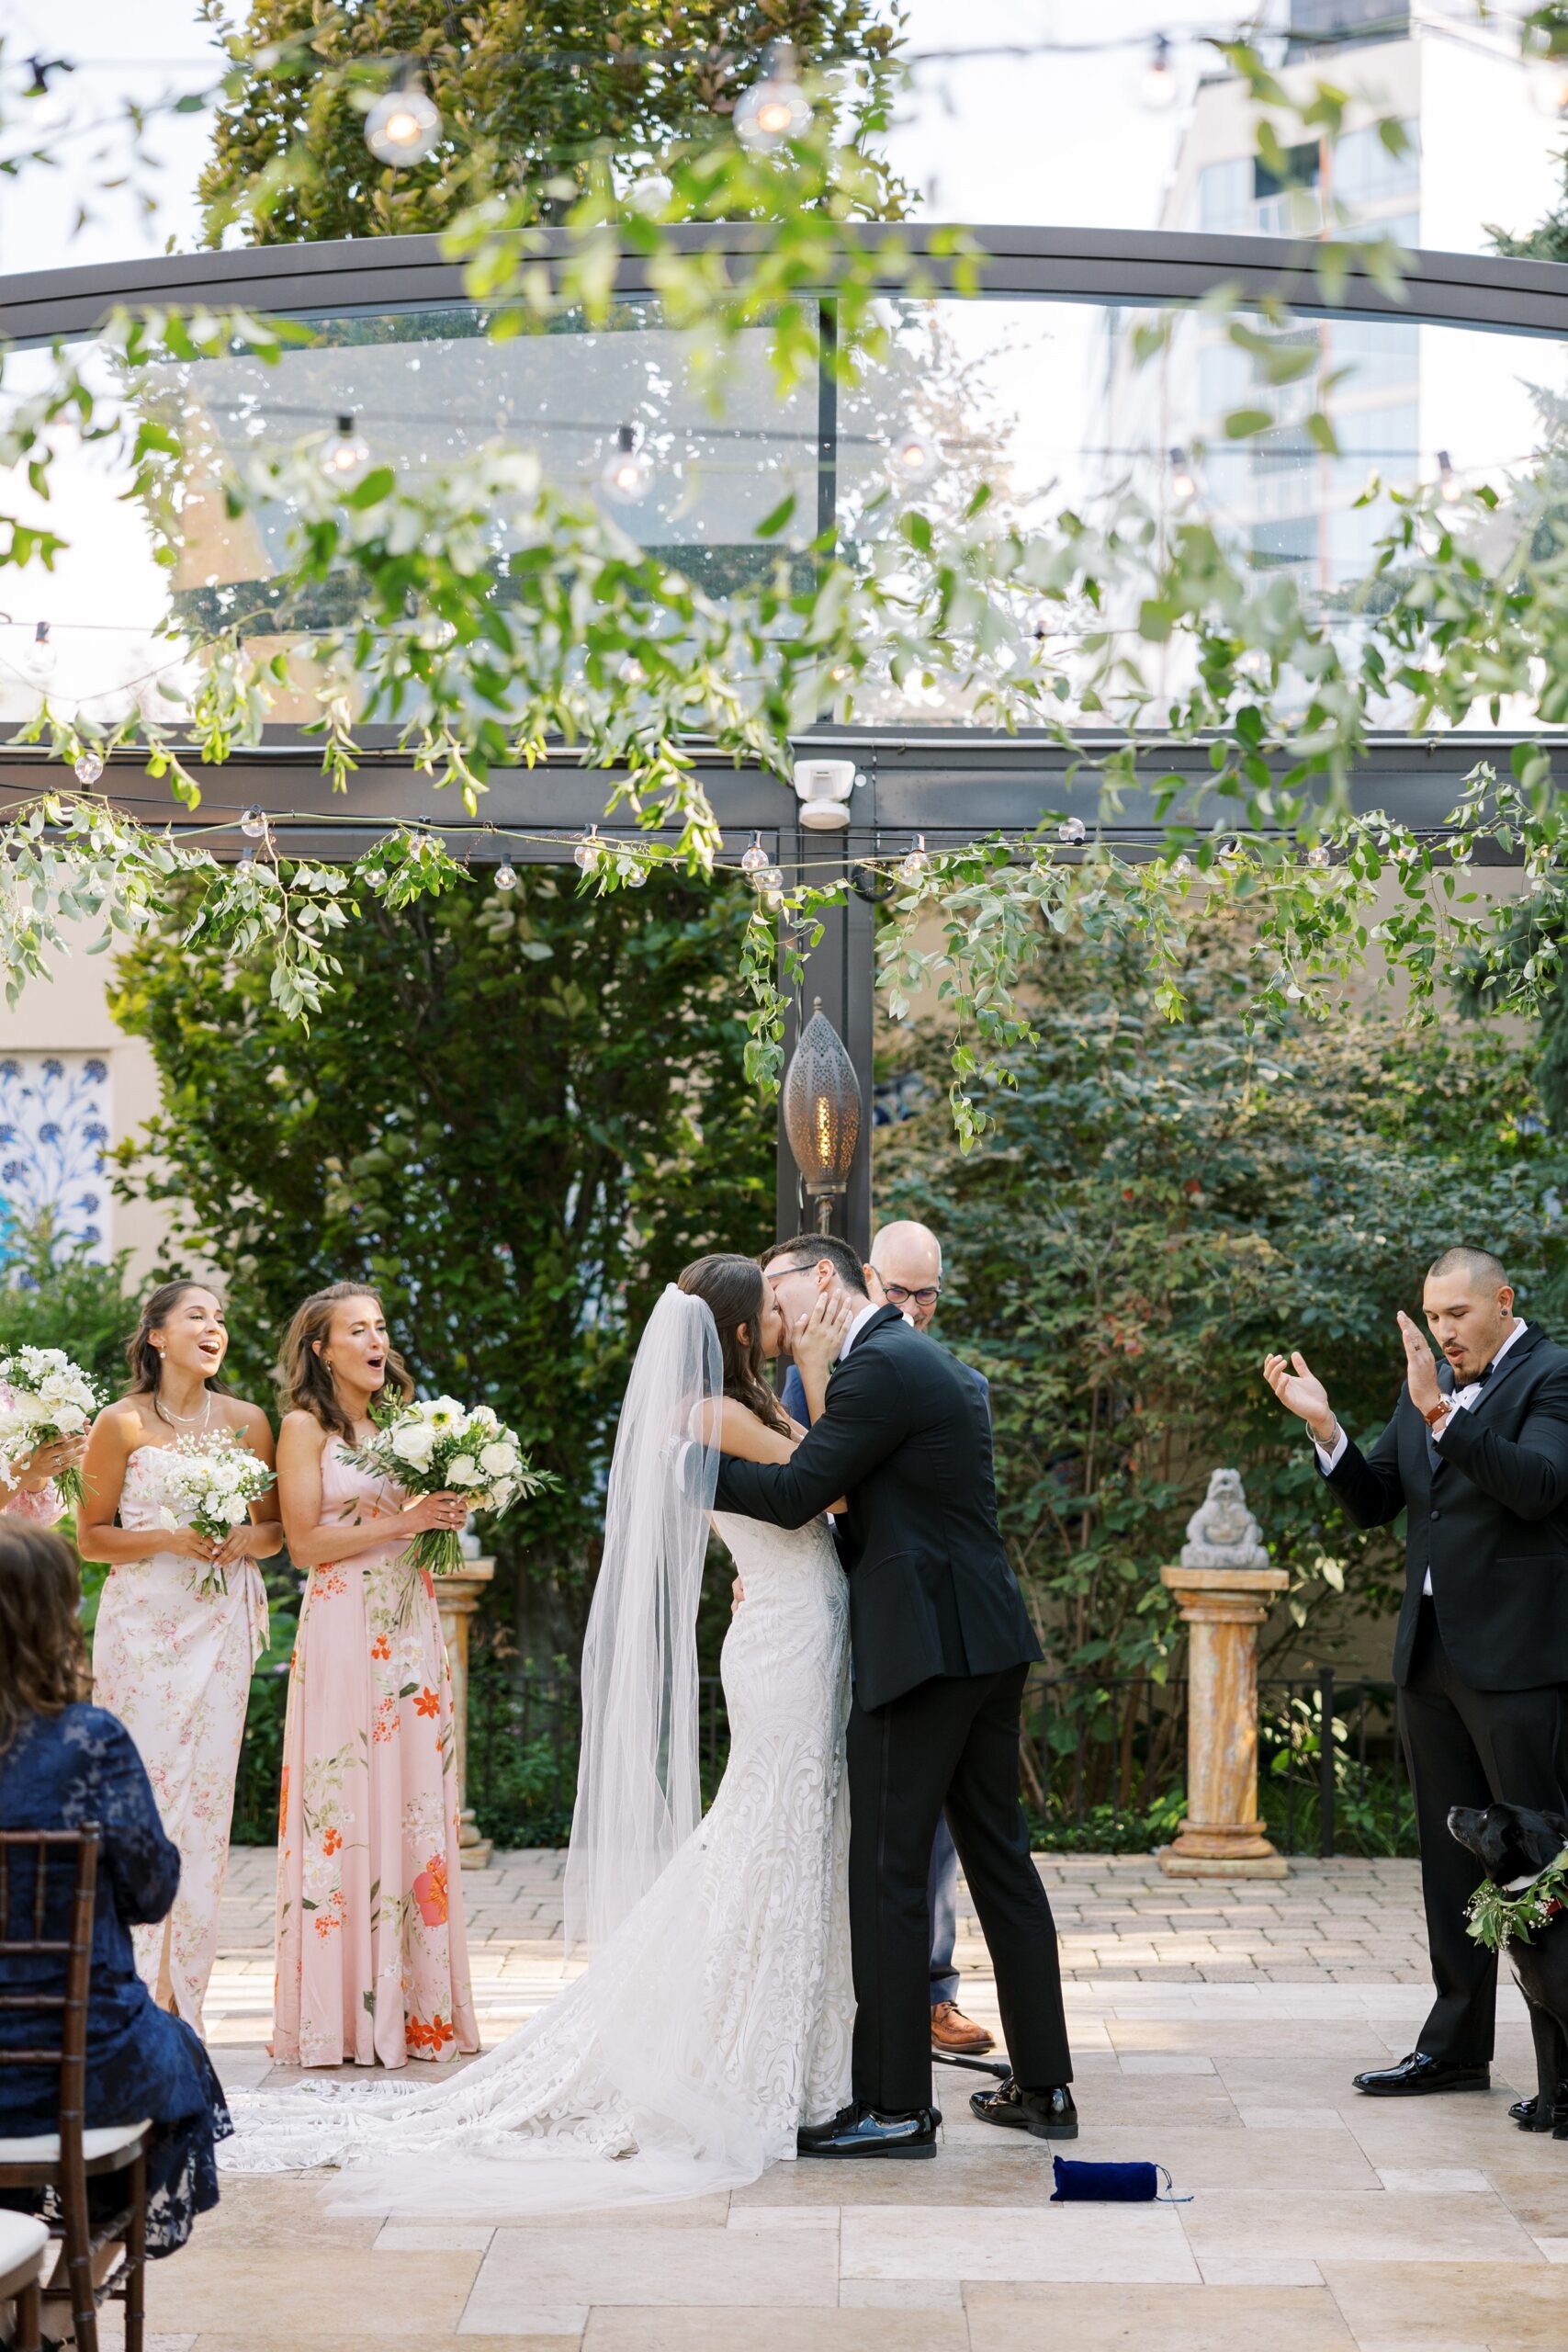 bride and groom kiss at outdoor ceremony at their galleria Marchetti wedding